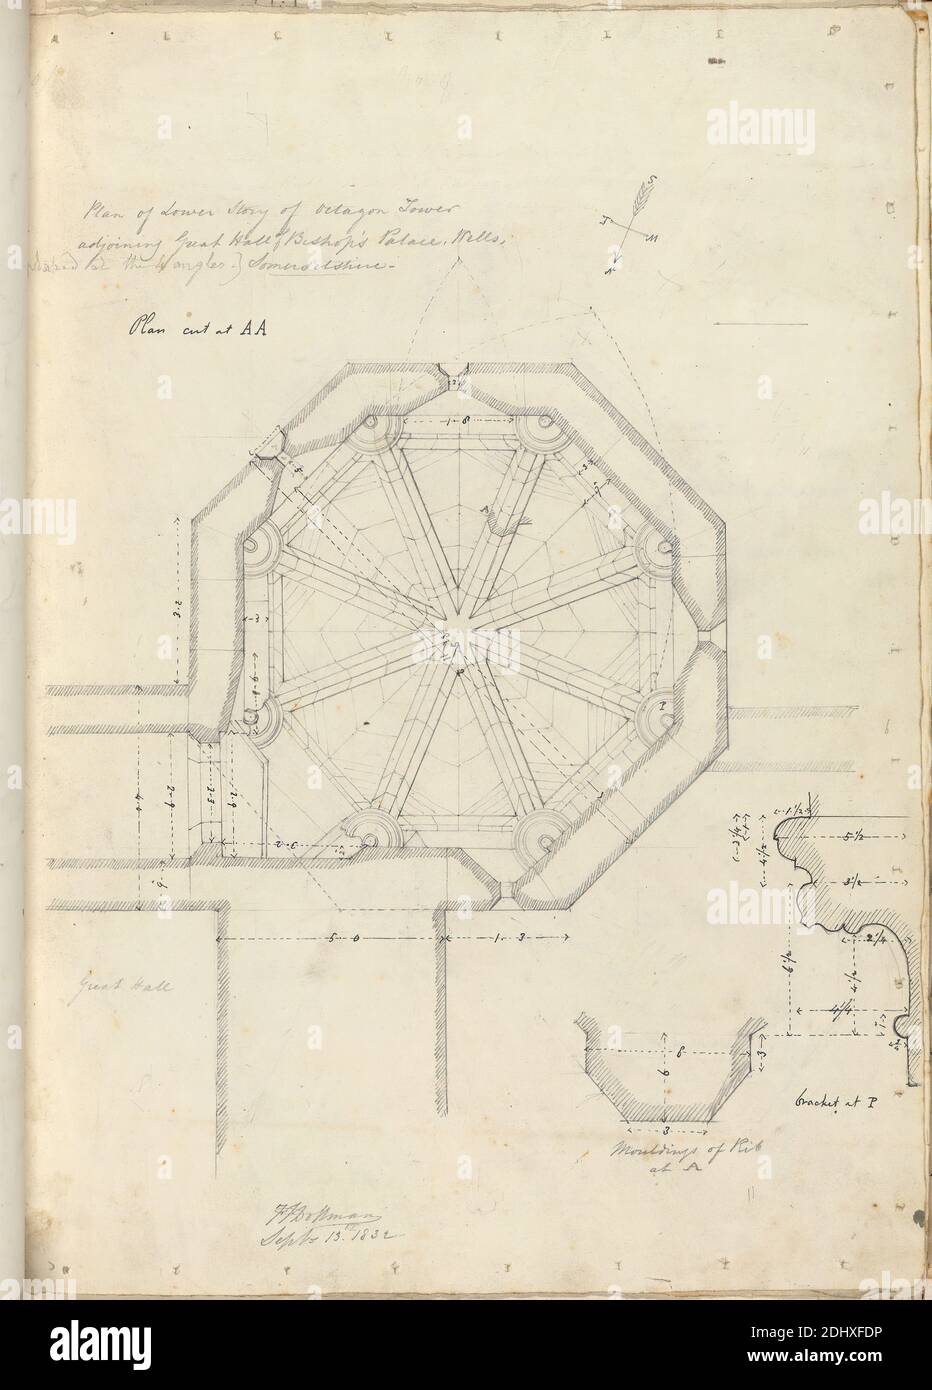 Bishop's Palace, Wells, Somerset: Lower Floor Plan of Octagon Tower, unknown artist, (FT Dollman), studio of Augustus Charles Pugin, 1762–1832, French, formerly Augustus Welby Northmore Pugin, 1812–1852, British, 1832, Pen and black ink with graphite on medium, slightly textured, cream wove paper, Sheet: 14 7/8 x 10 1/2 inches (37.8 x 26.7 cm), architectural subject, Gothic (Medieval), moulding, octagonal, palace, plans (drawings), sections, Wells Stock Photo